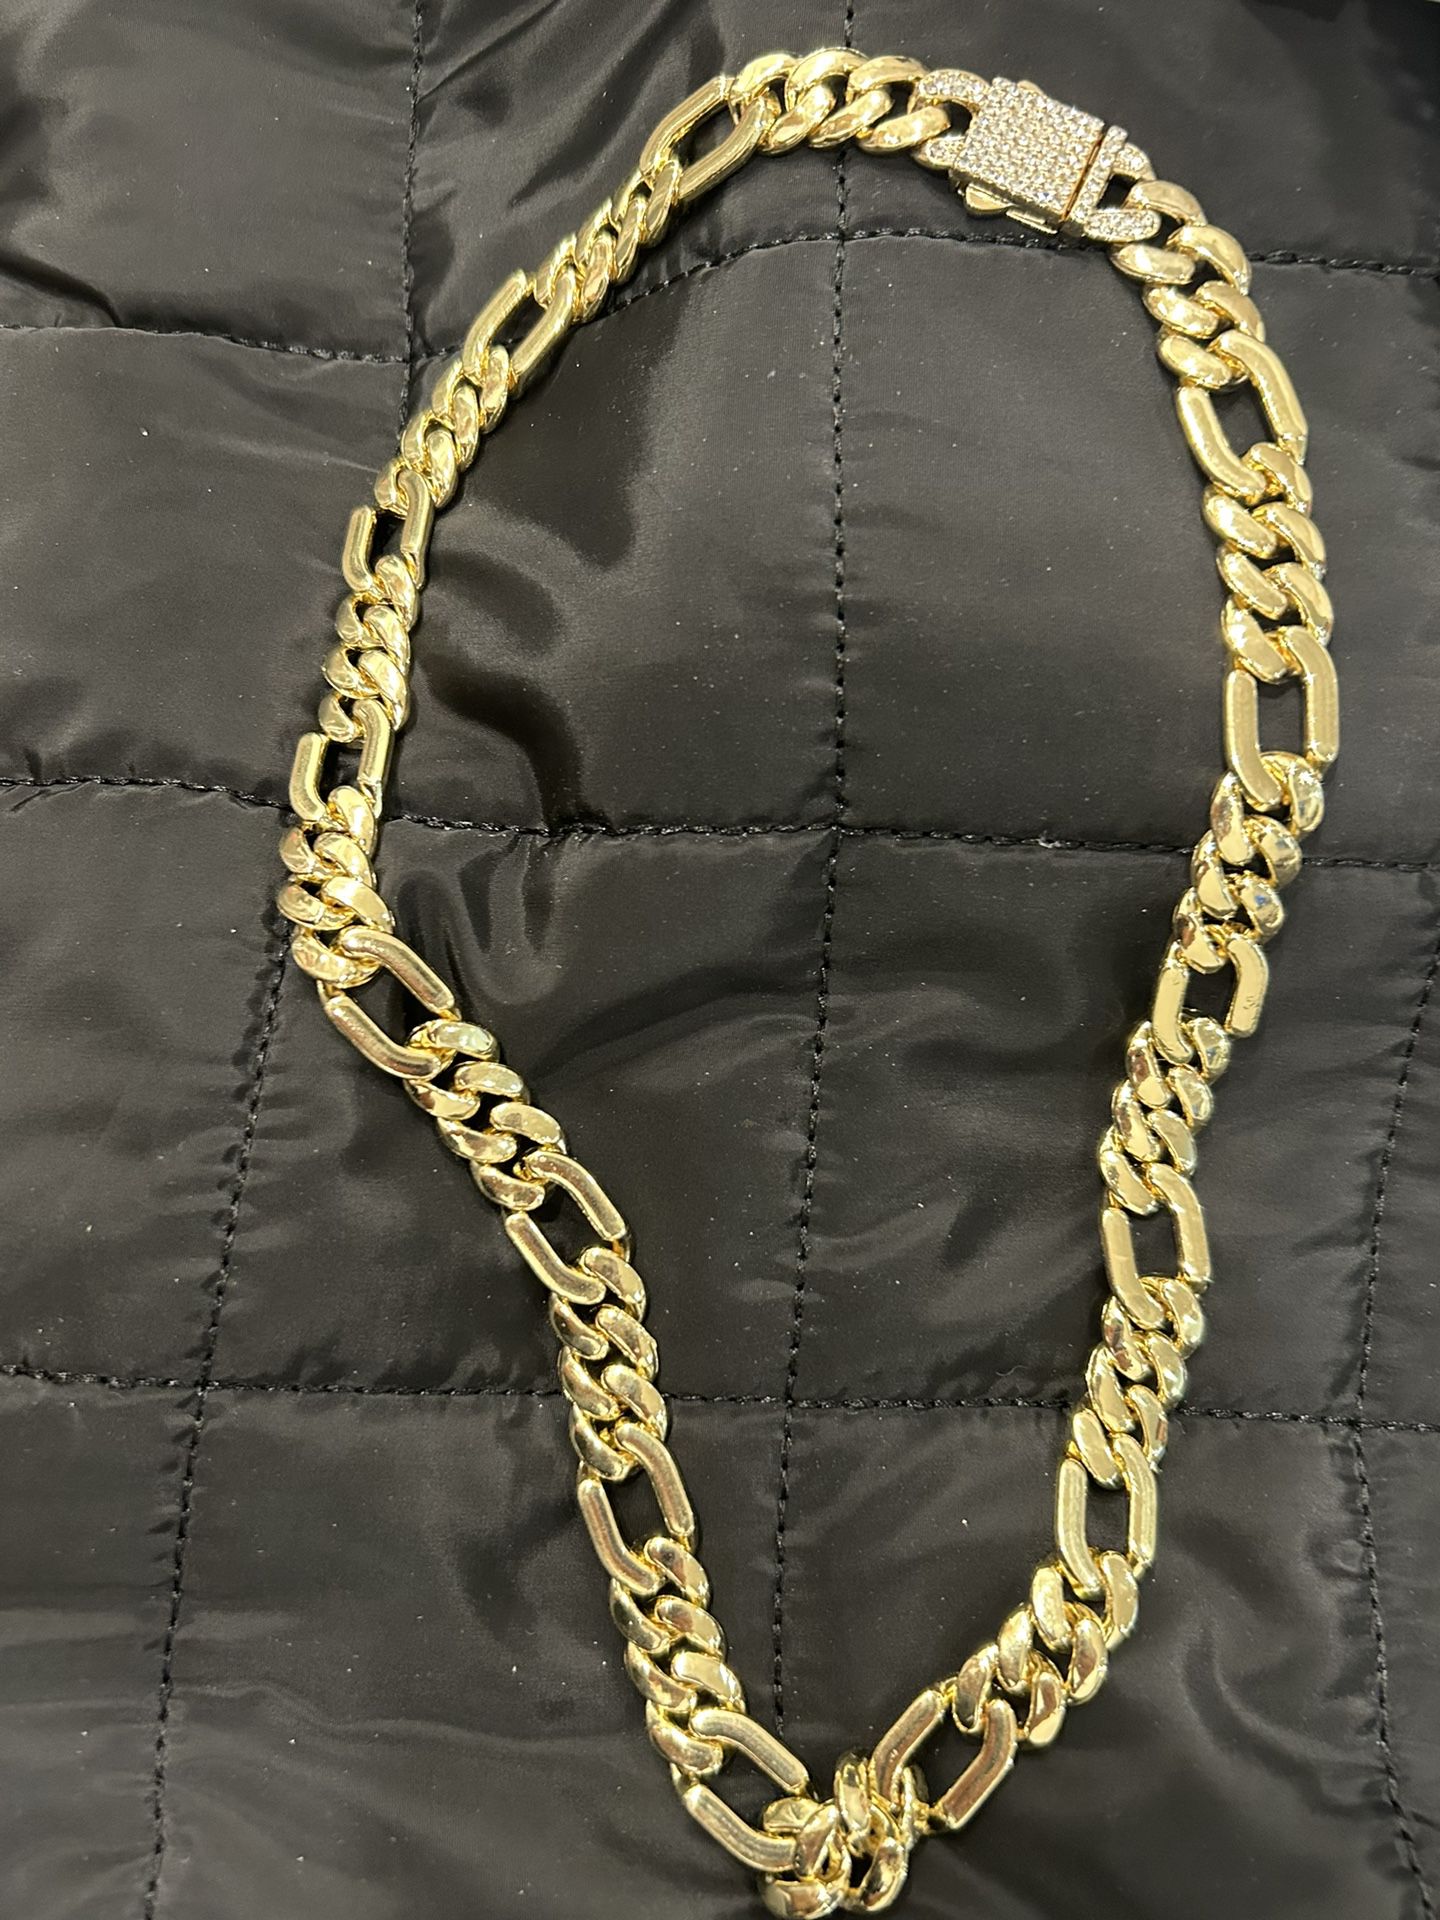 gold plated solid chain/necklace